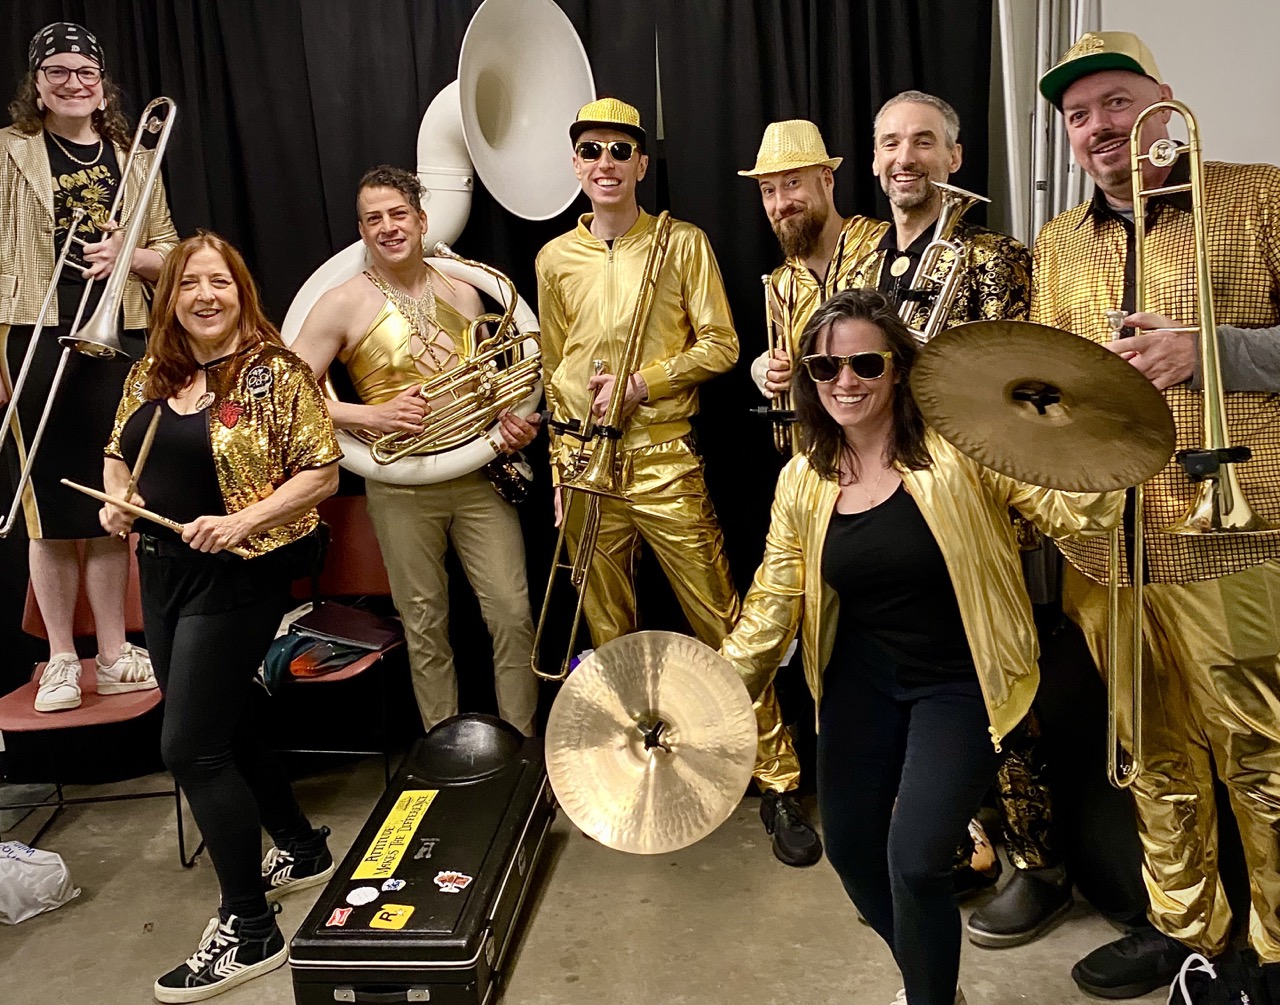 People posing for the camera with brass instruments and percussion dressed in metallic gold clothes.